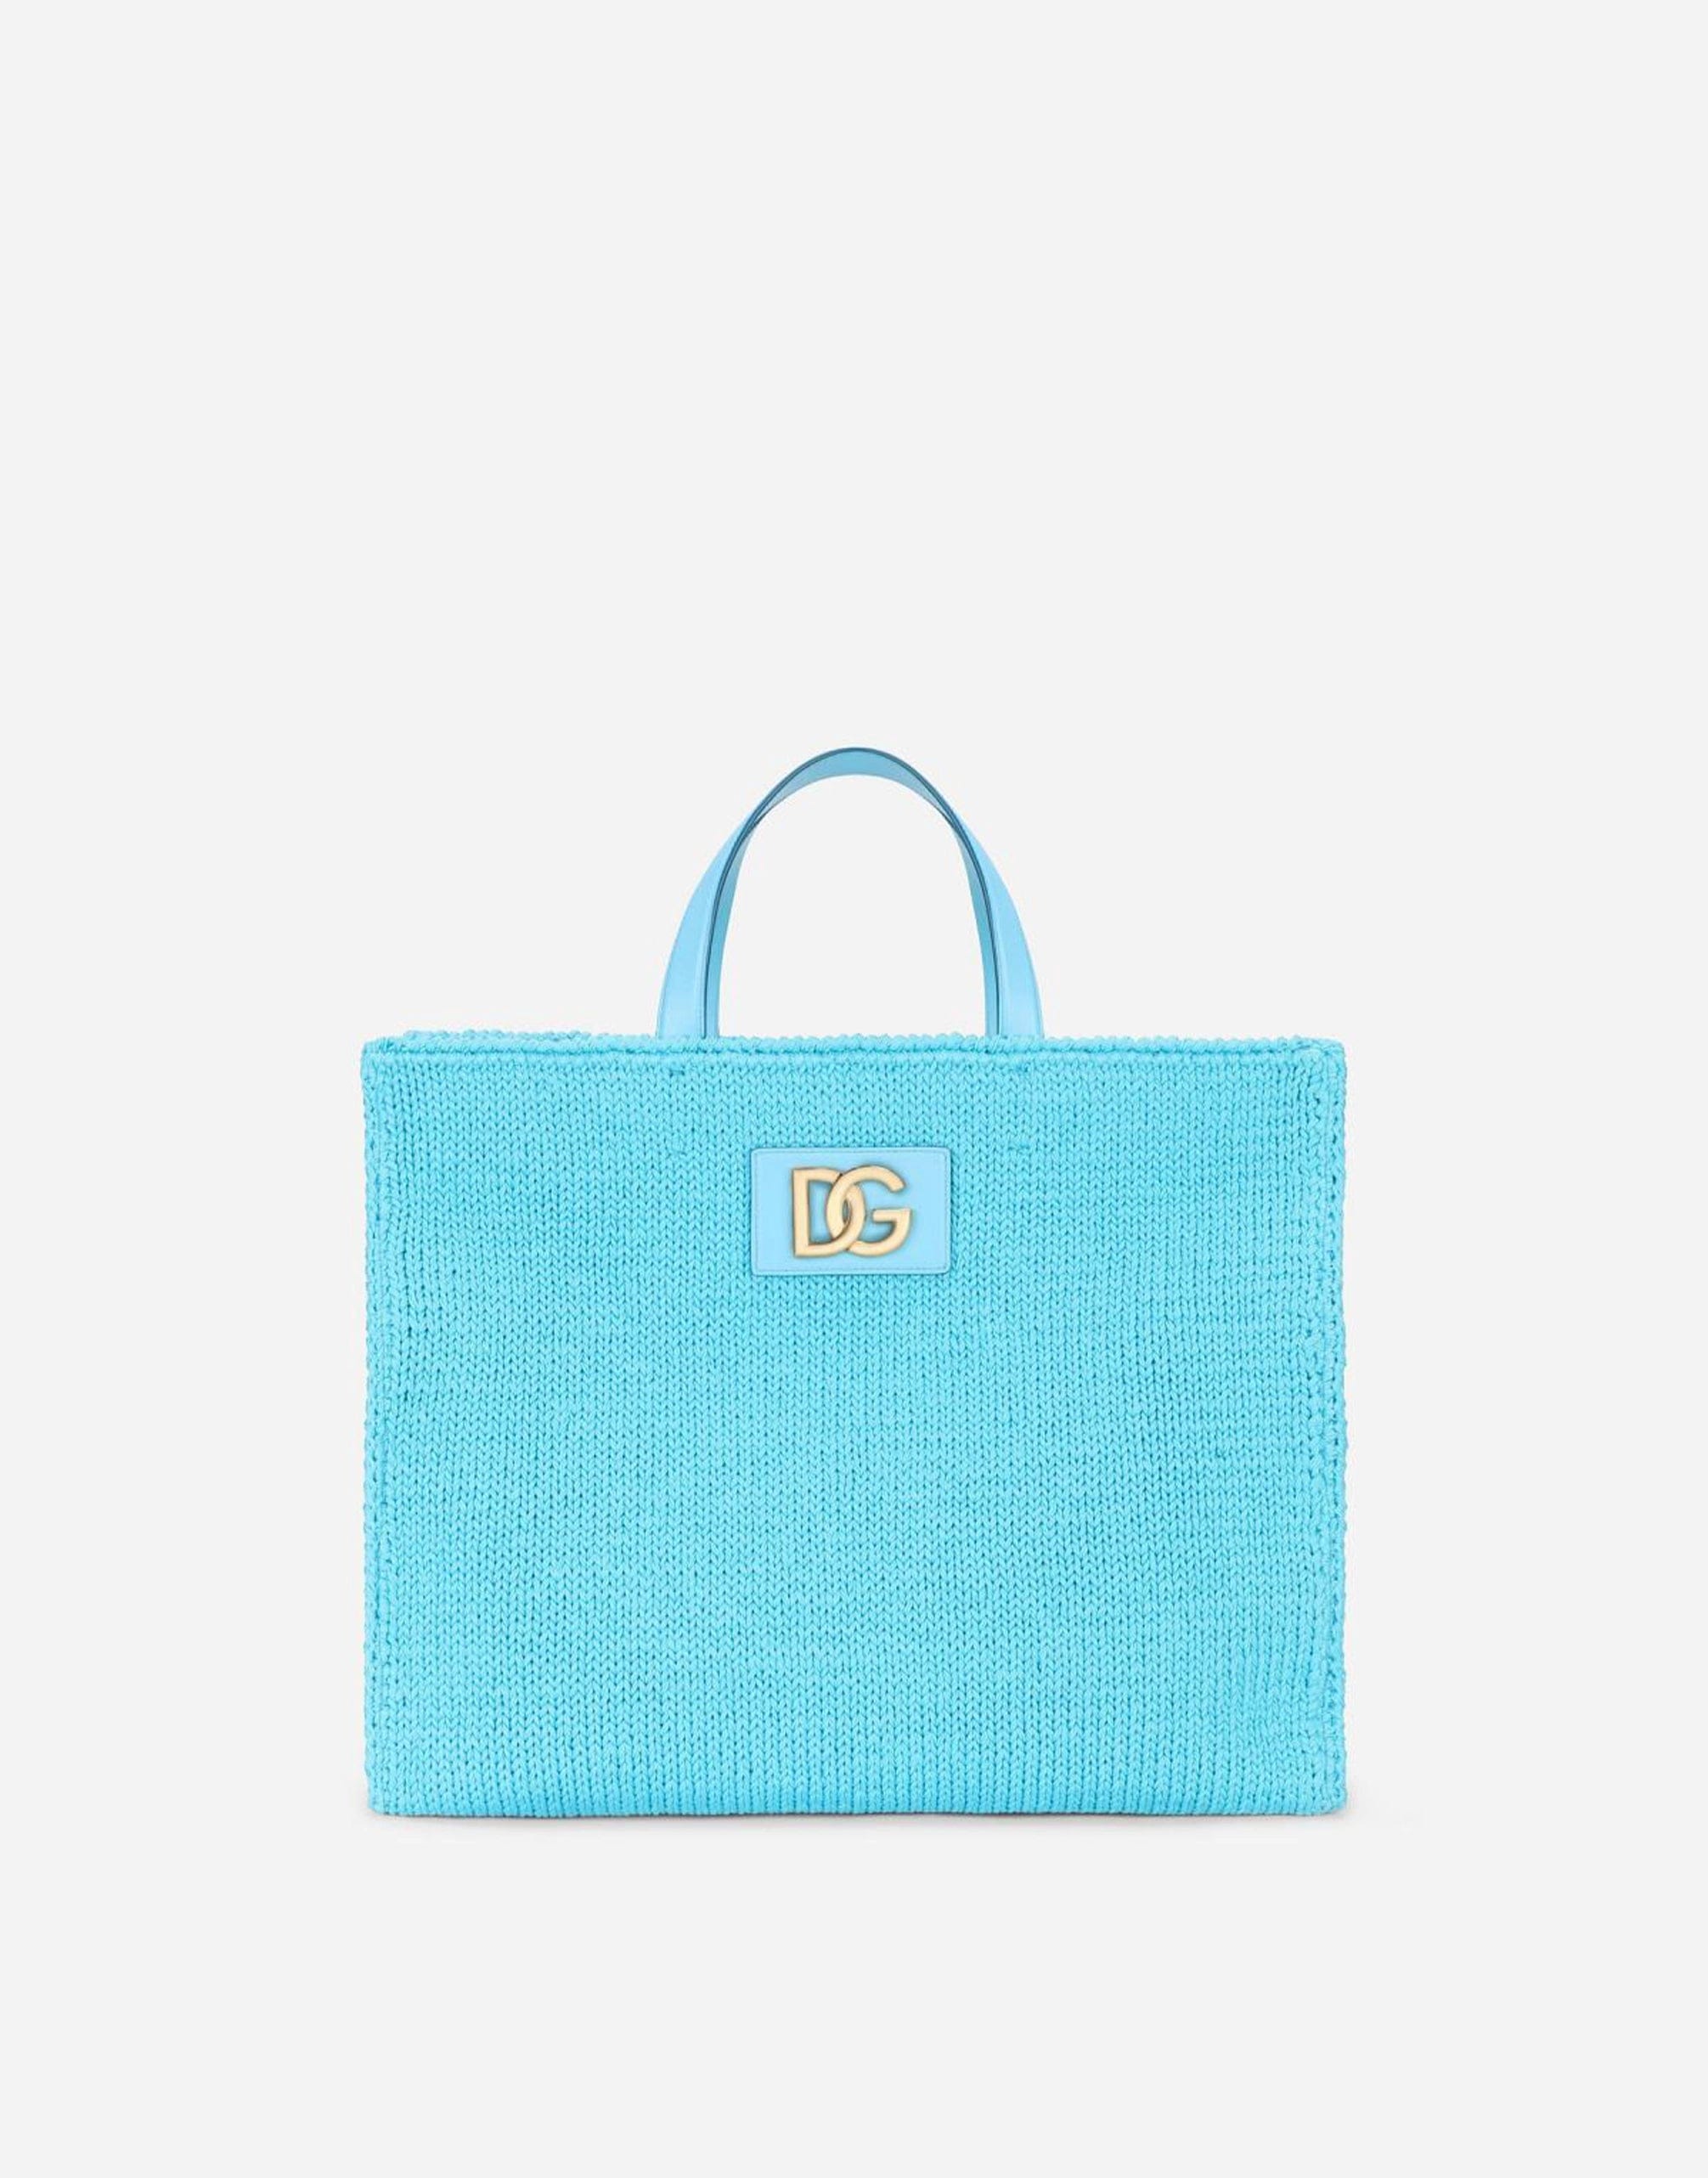 Dolce & Gabbana Knit Large Beatrice Tote